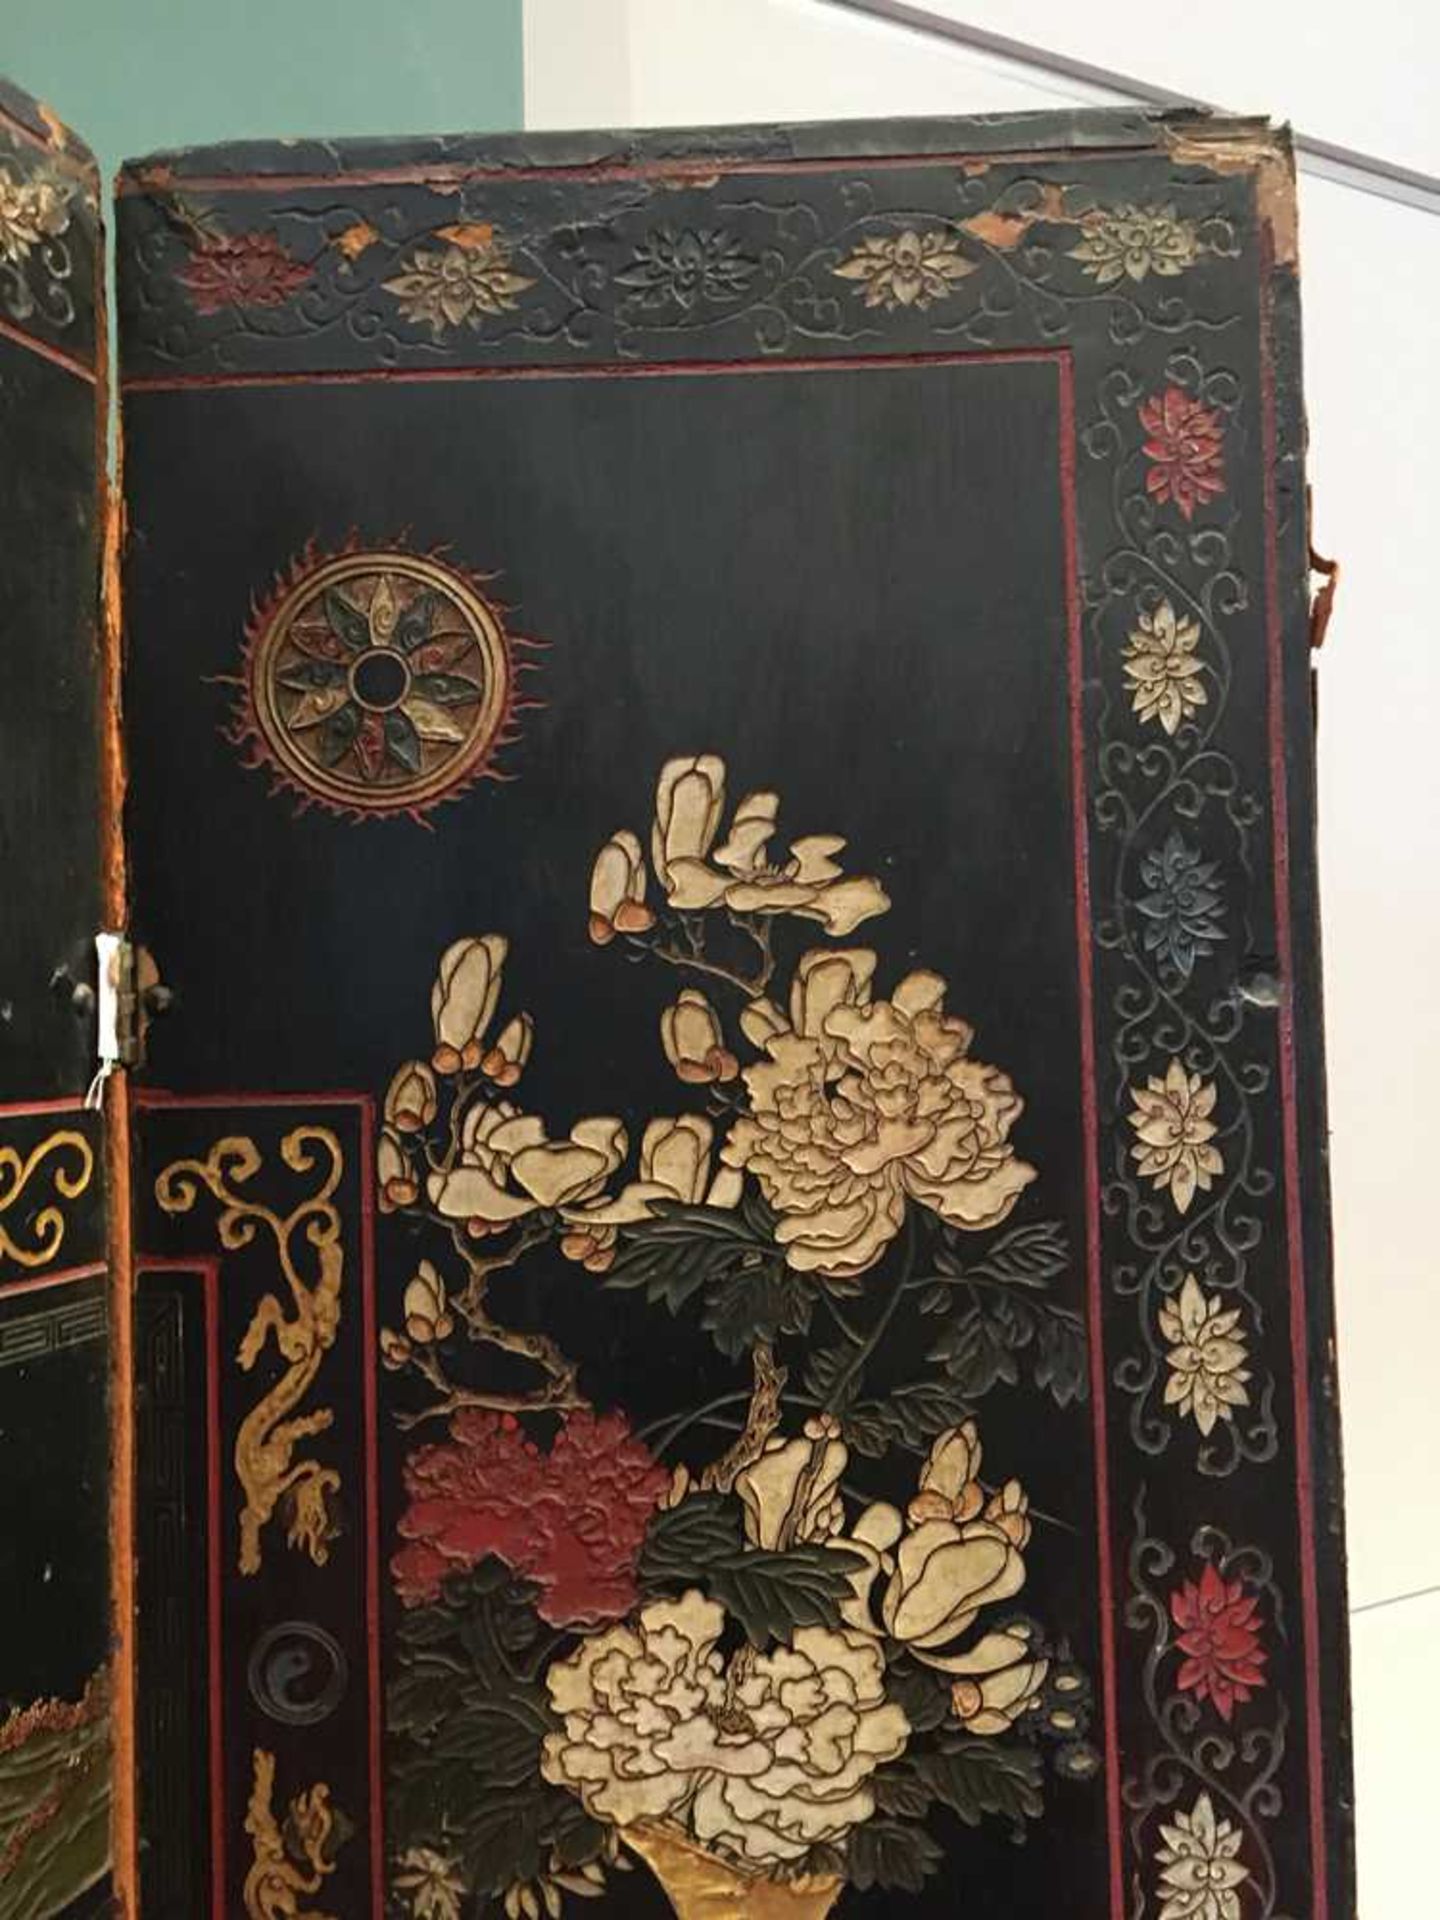 A CHINESE COROMANDEL BLACK LACQUER TWELVE-PANEL SCREEN QING DYNASTY, 18TH CENTURY - Image 48 of 72